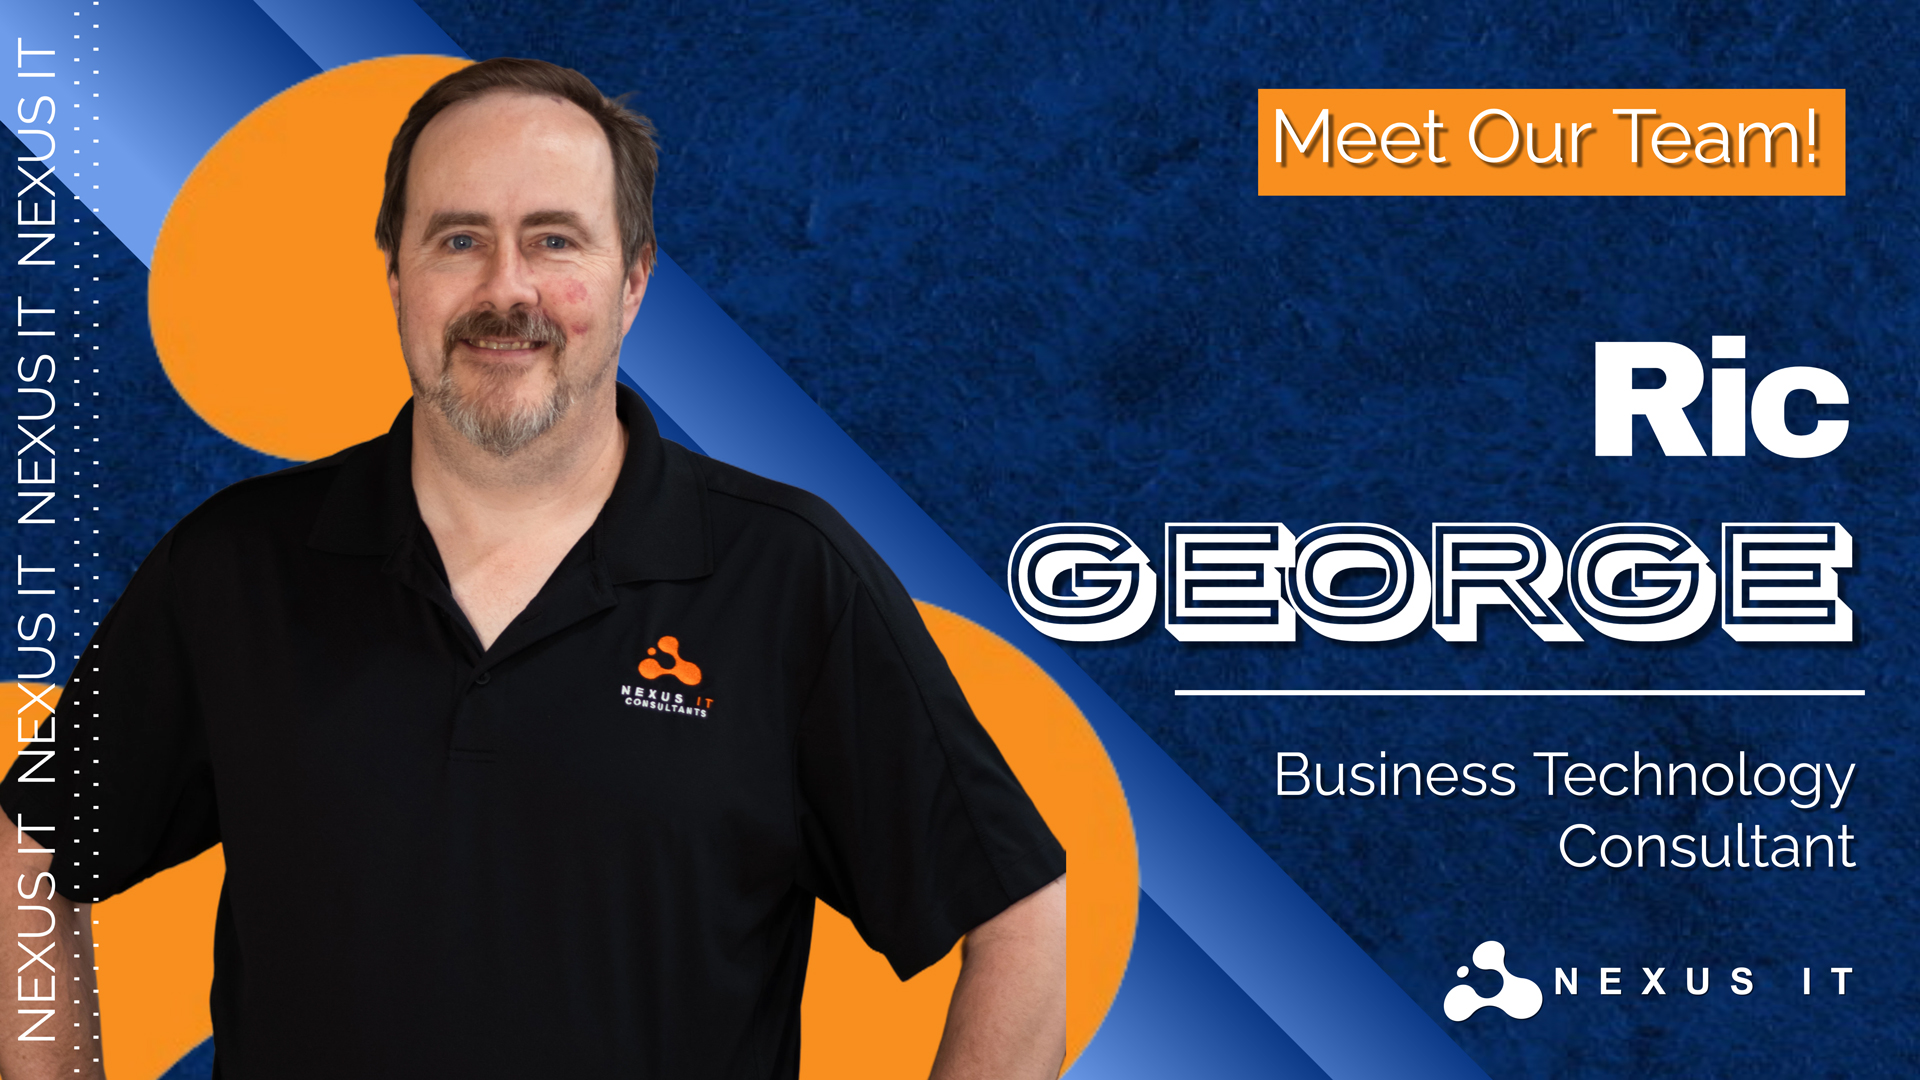 Richard George – The Newest Addition To Nexus’ Team Of IT Experts